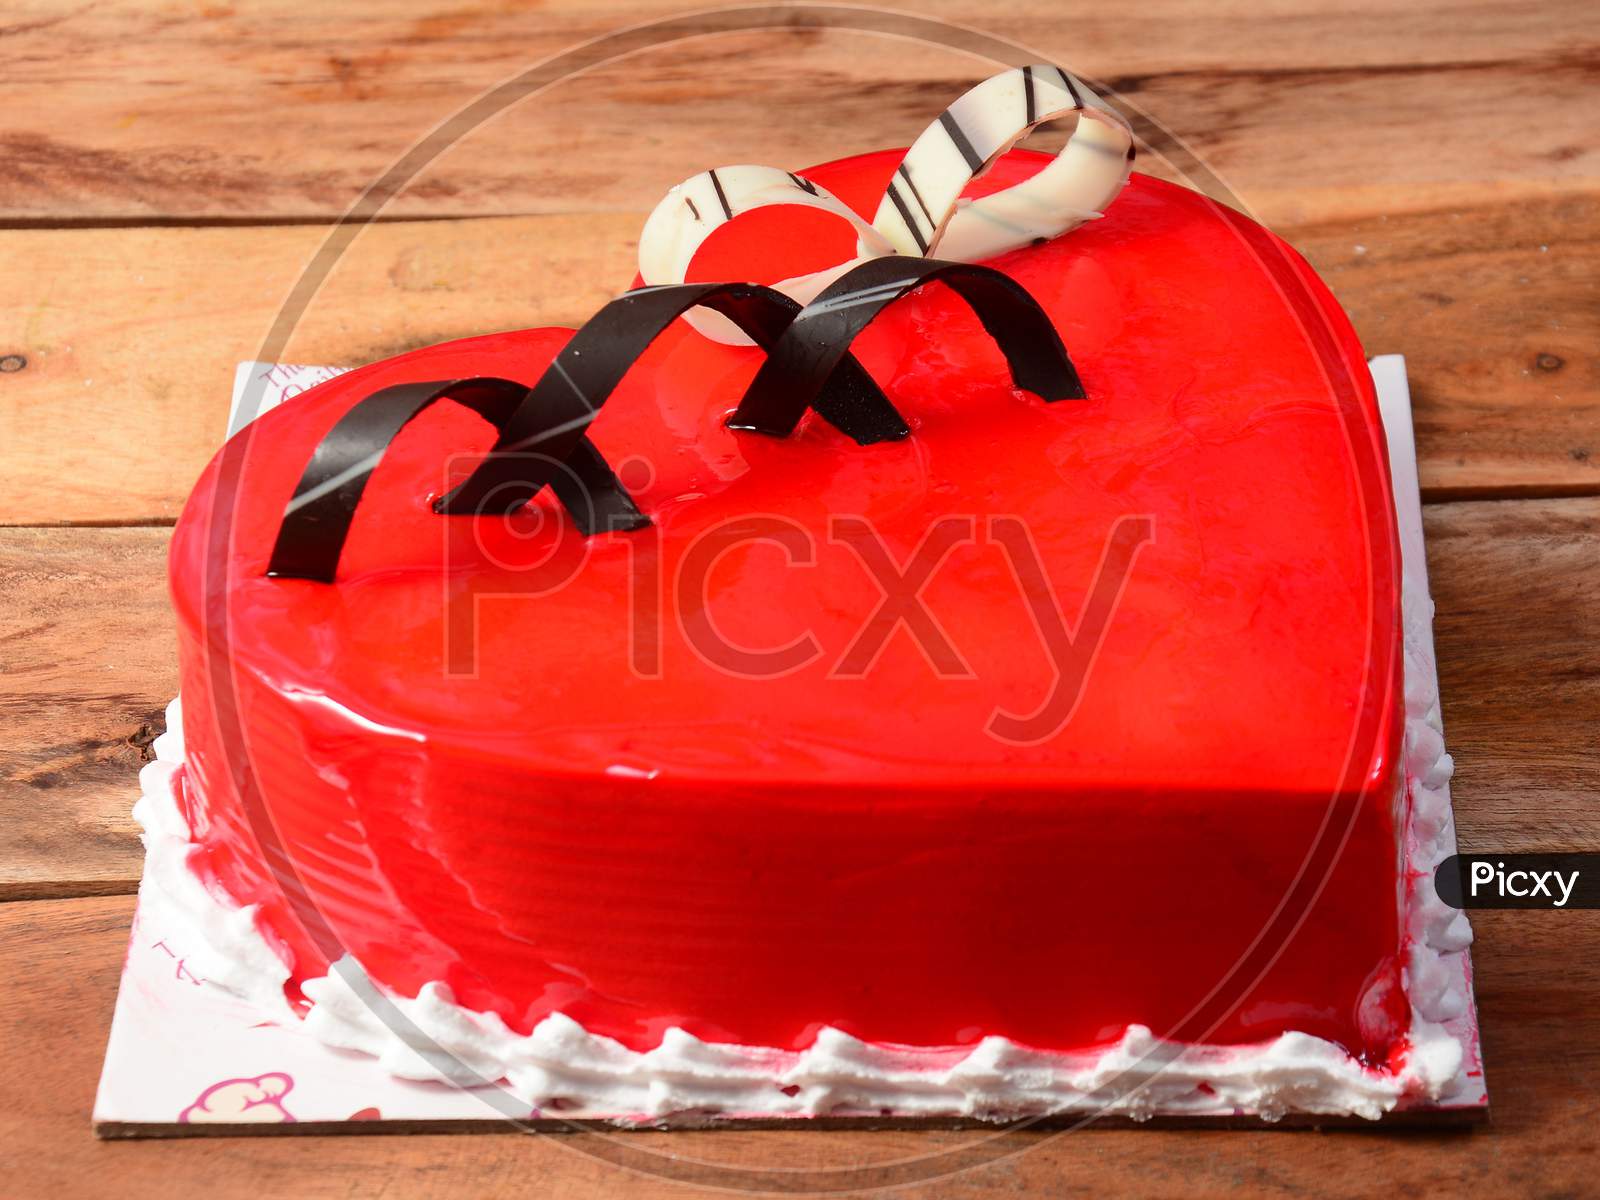 Freshly Made Strawberry Cream Cake On Wooden Table. Selective Focus